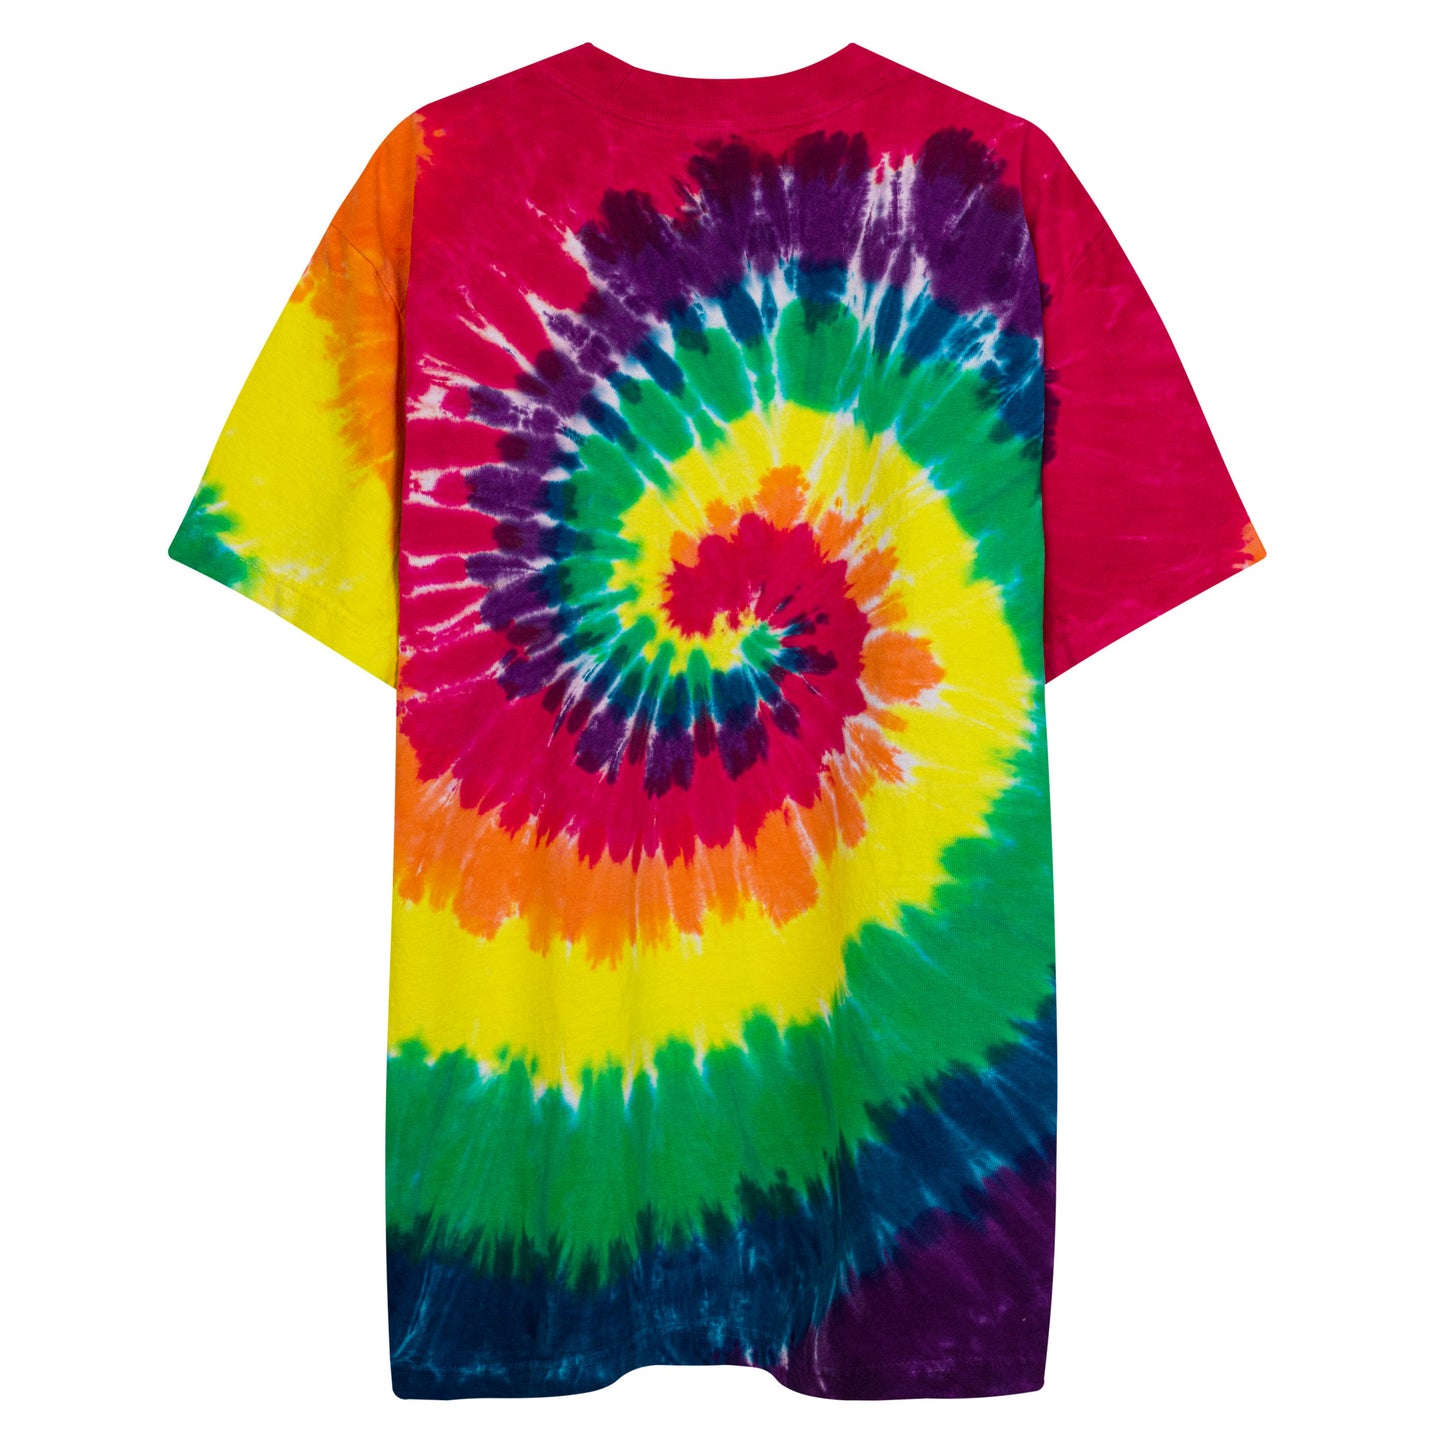 Adonis-Creations - Embroidered Unisex Tie Dye short sleeve T Shirt